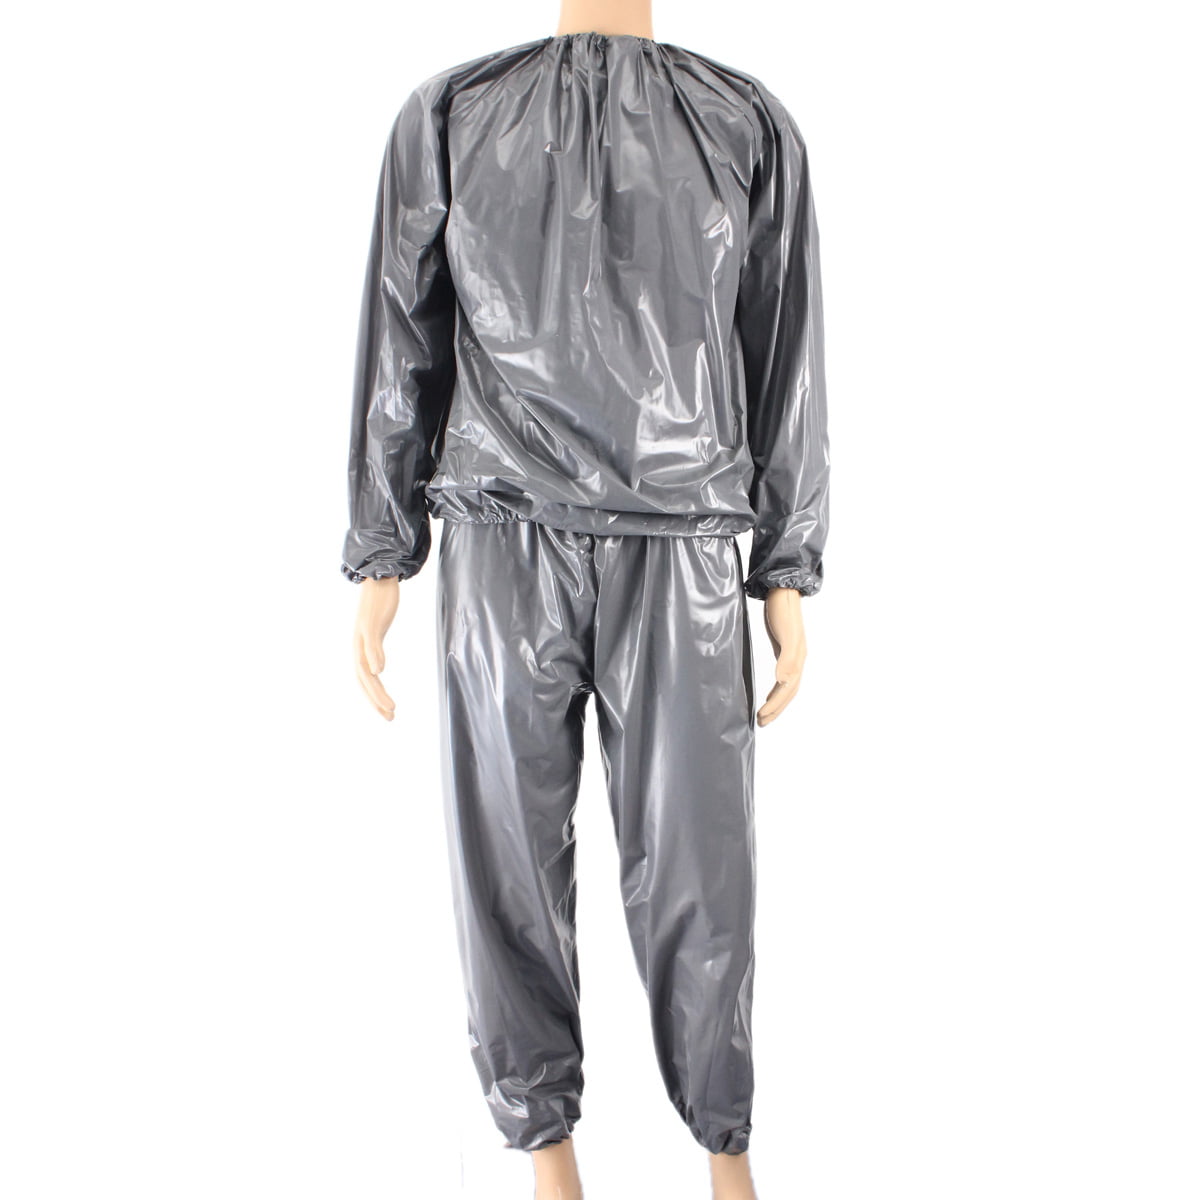 Sauna Suit Heavy Duty Sweat Suit Exercise Gym Suit Fitness Weight Loss with Hood 